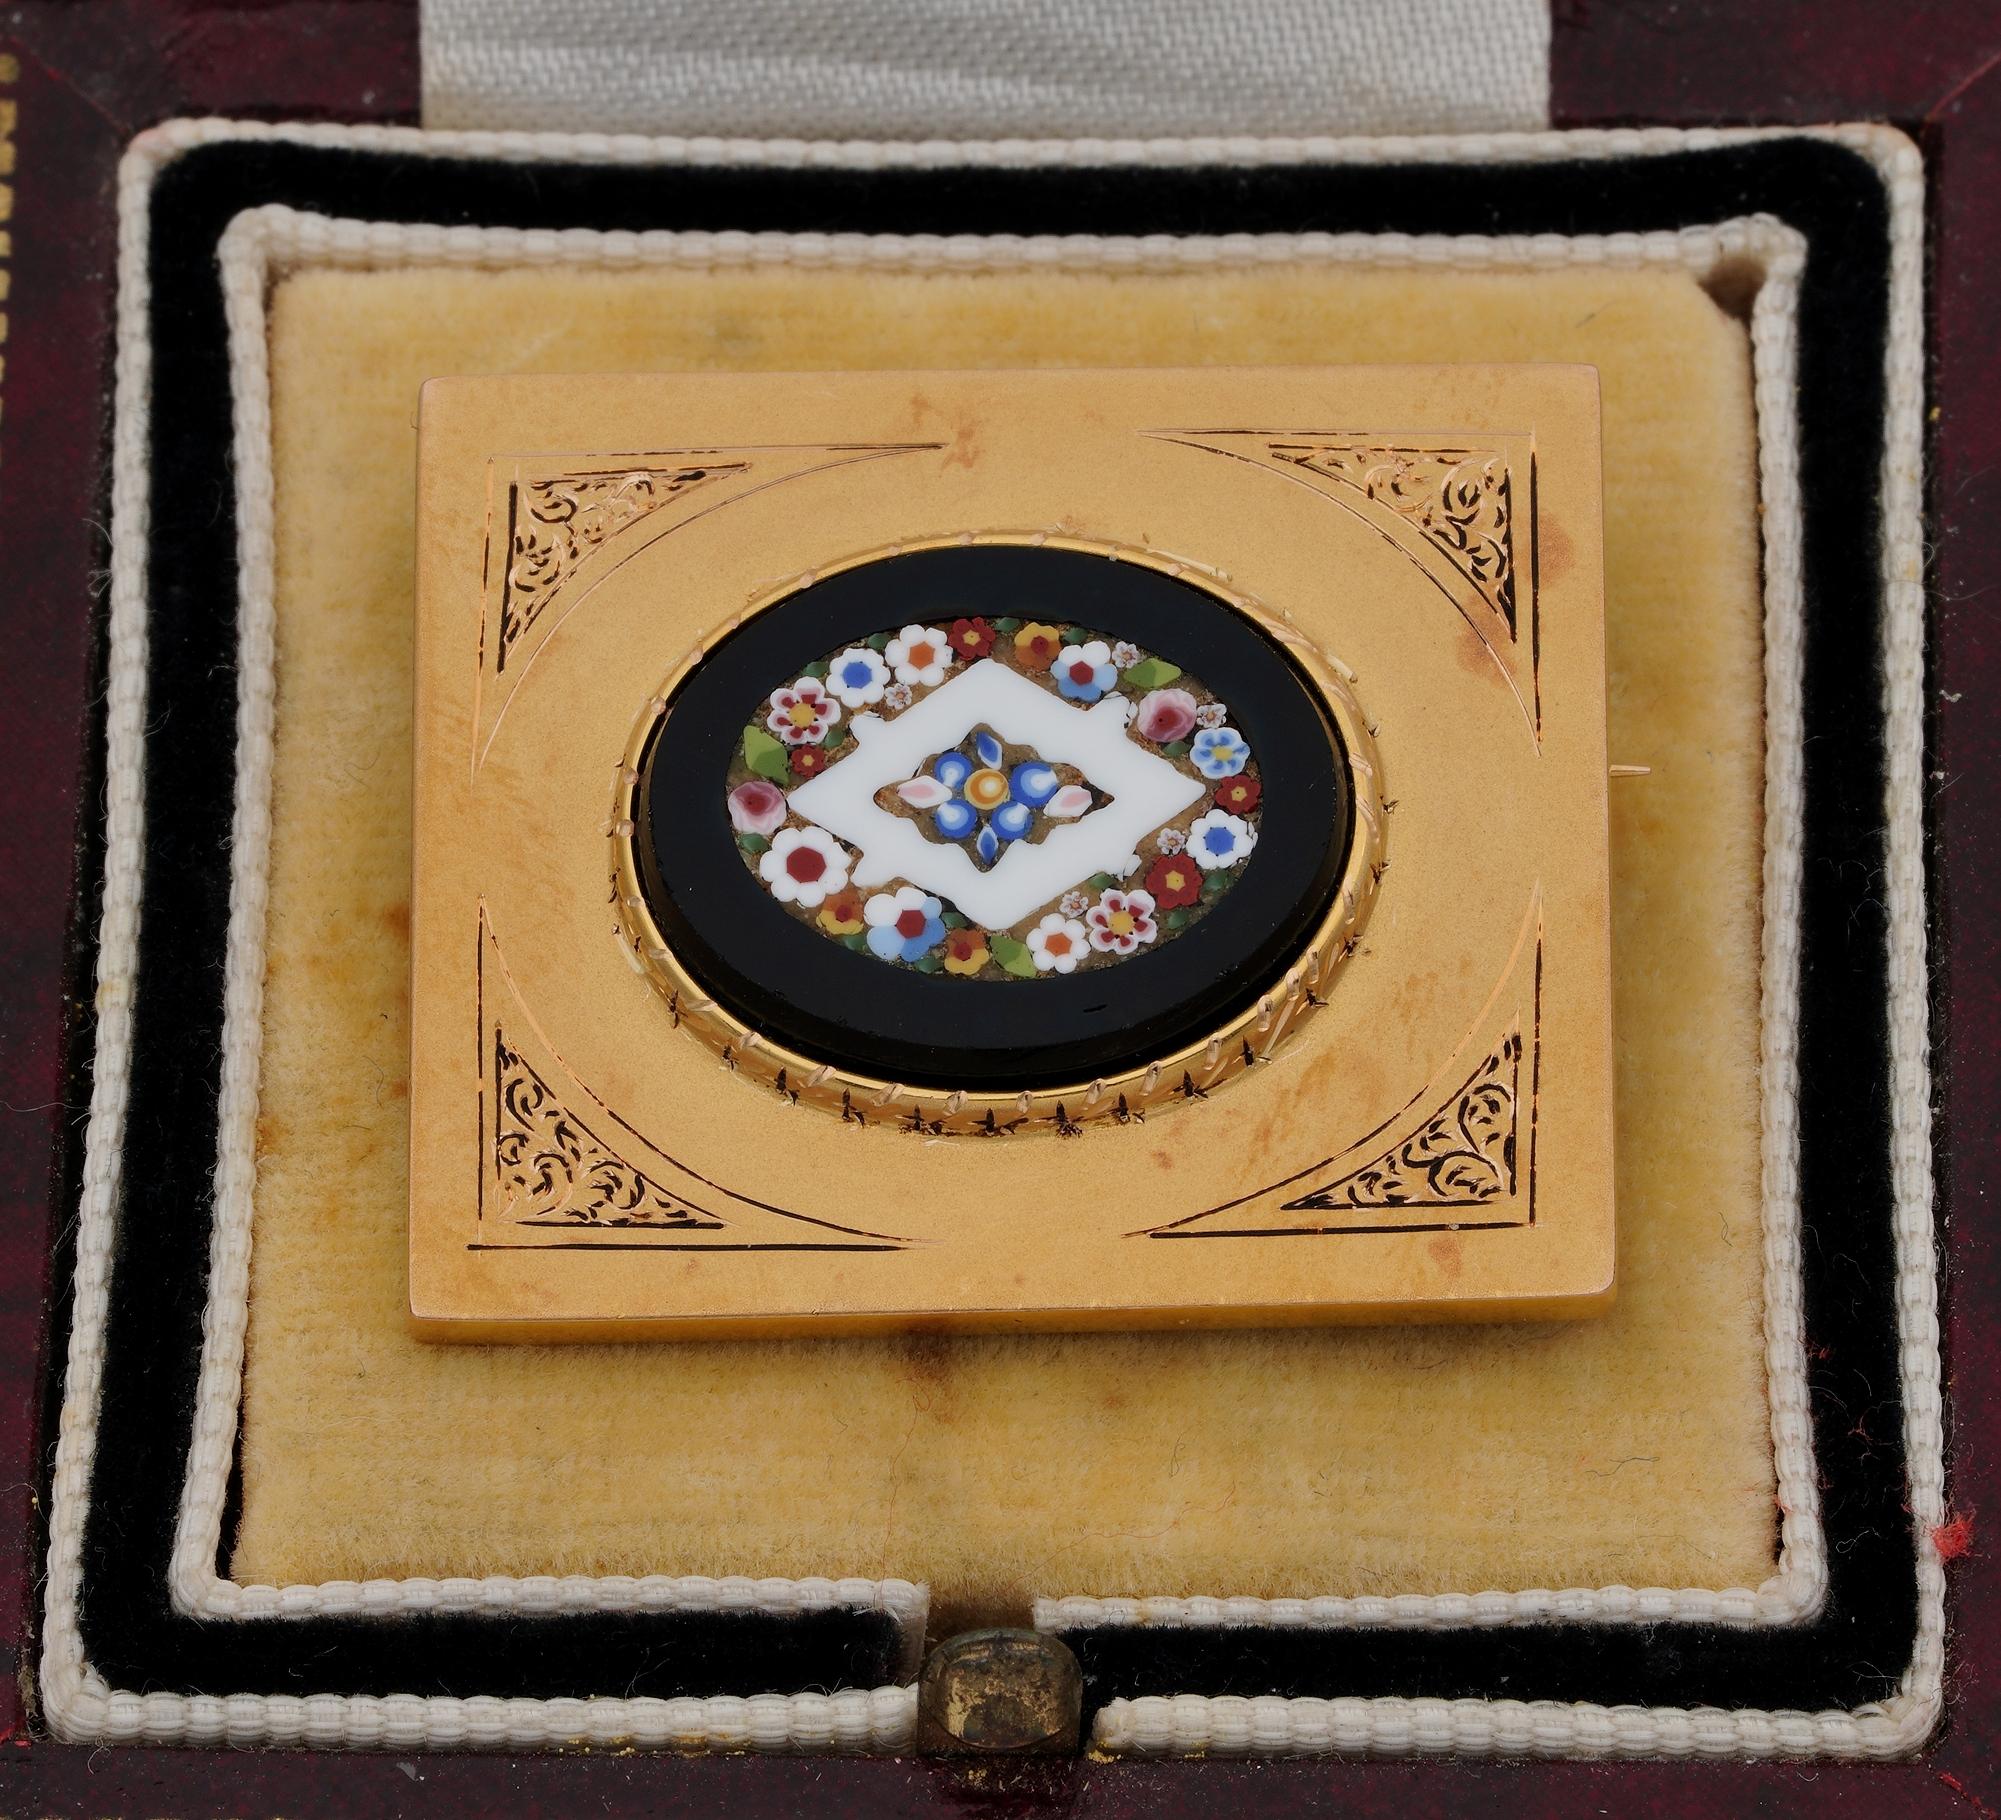 Micro Mosaic Past Art

This very fine example of Italian Micro mosaic brooch is from the Edwardian period 1910 ca 
Beautifully made with a large solid 18 KT gold rectangular frame with engraved details
Centring an oval Black Onyx gemstone with an